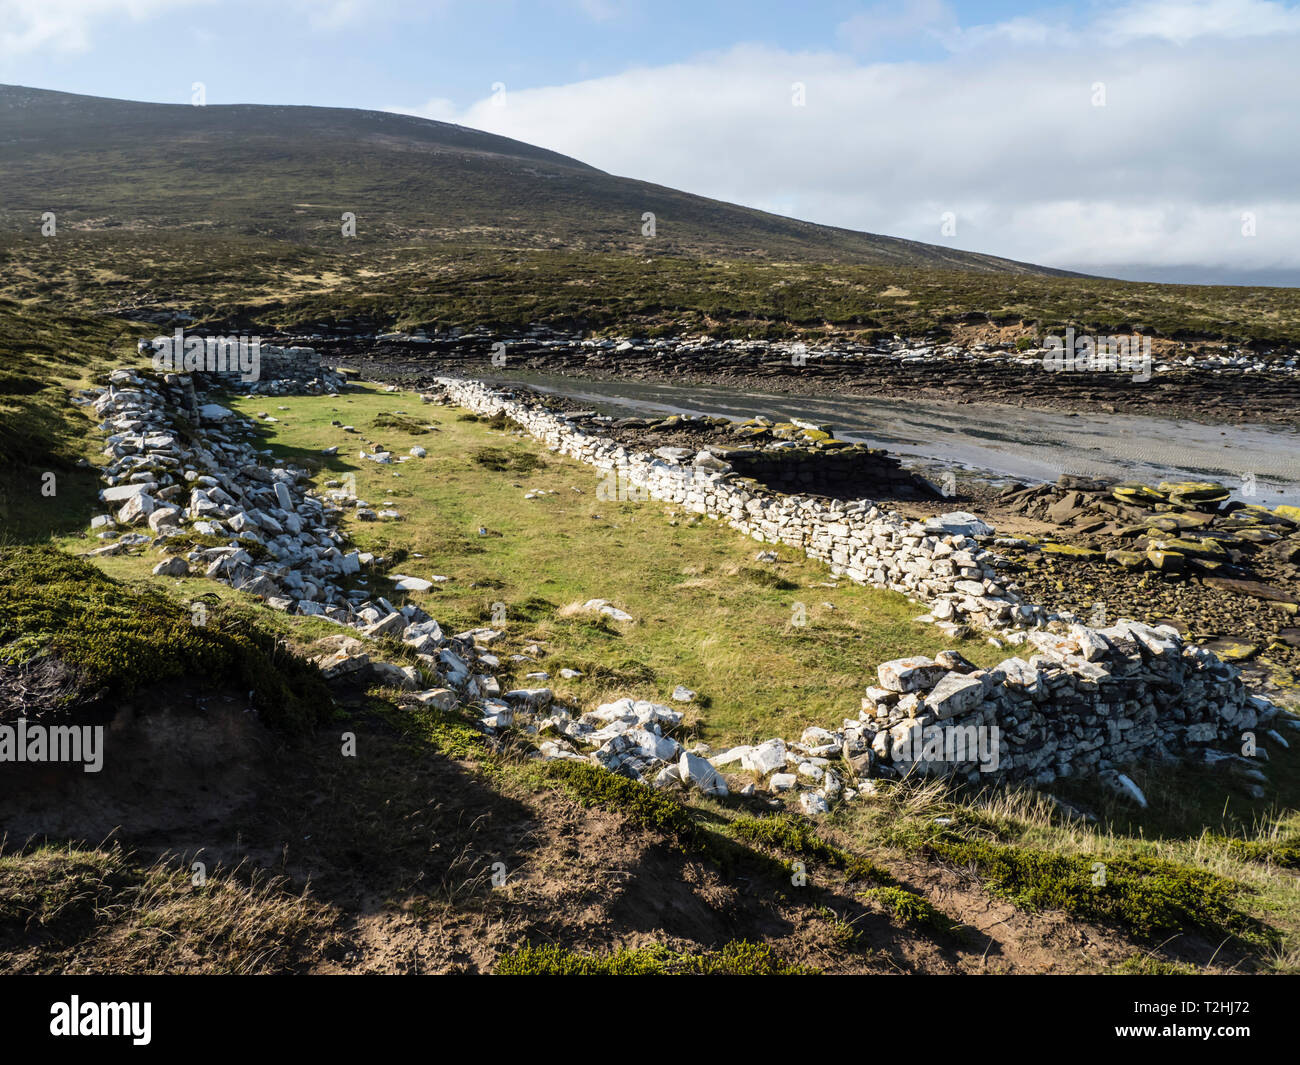 The remains of the British Garrison established at Port Egmont in 1765 on Saunders Island, Falkland Islands, South Atlantic Ocean Stock Photo